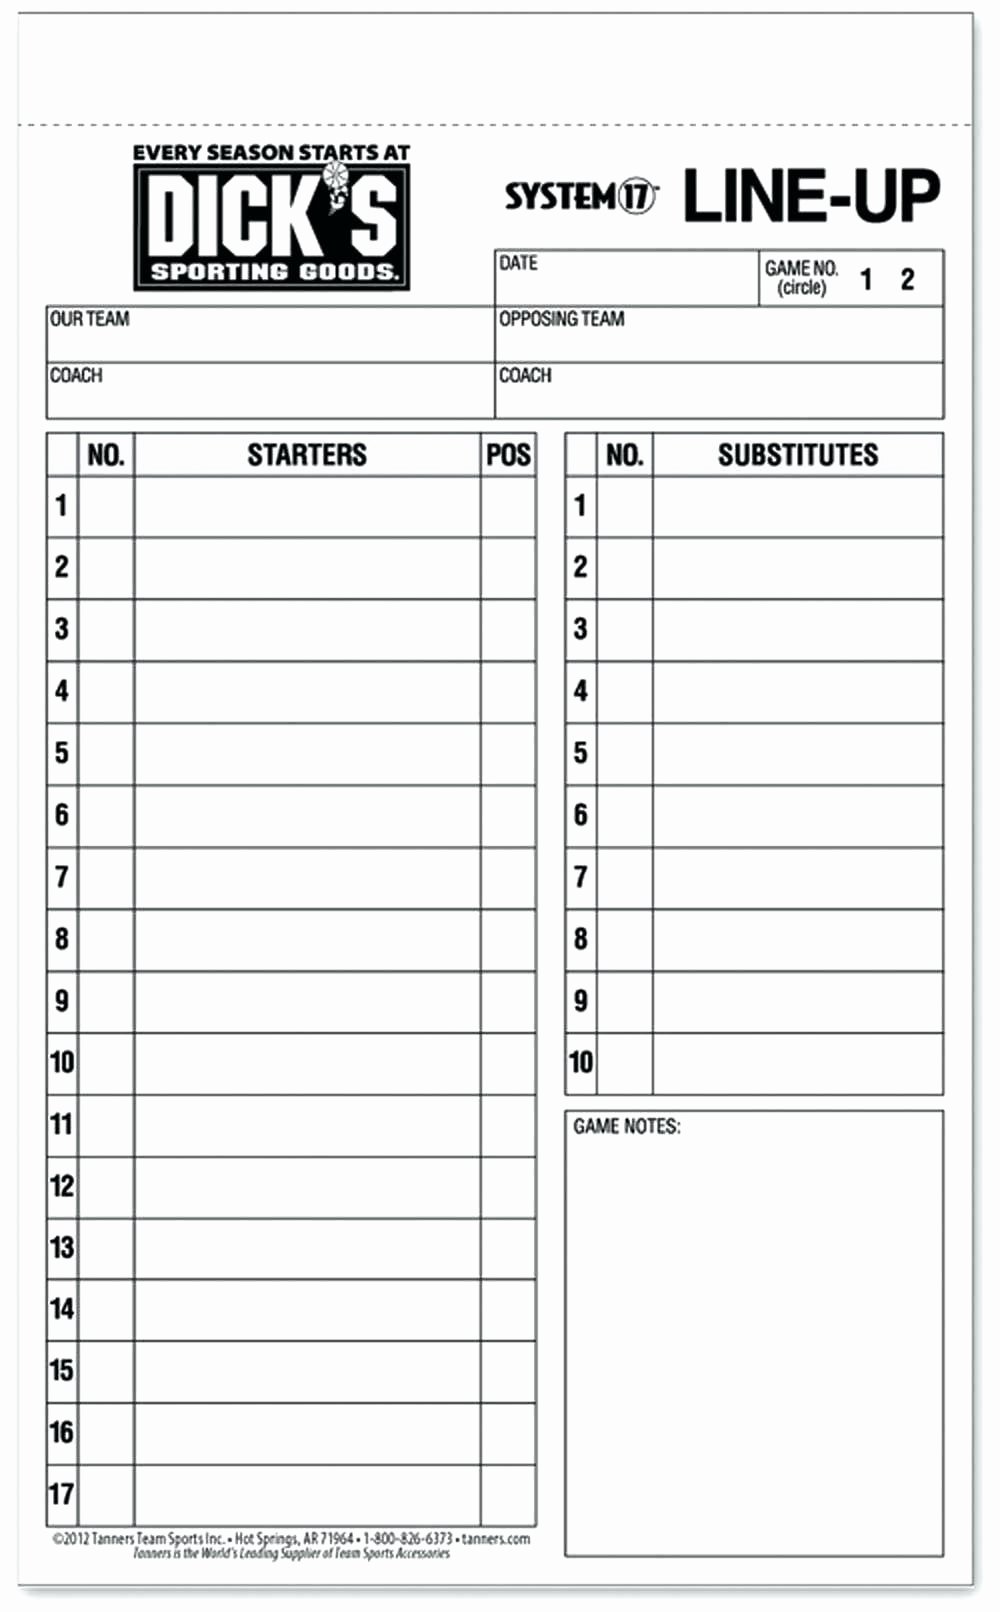 Baseball Card Inventory Excel Template Luxury Baseball Card Inventory Spreadsheet Google Spreadshee